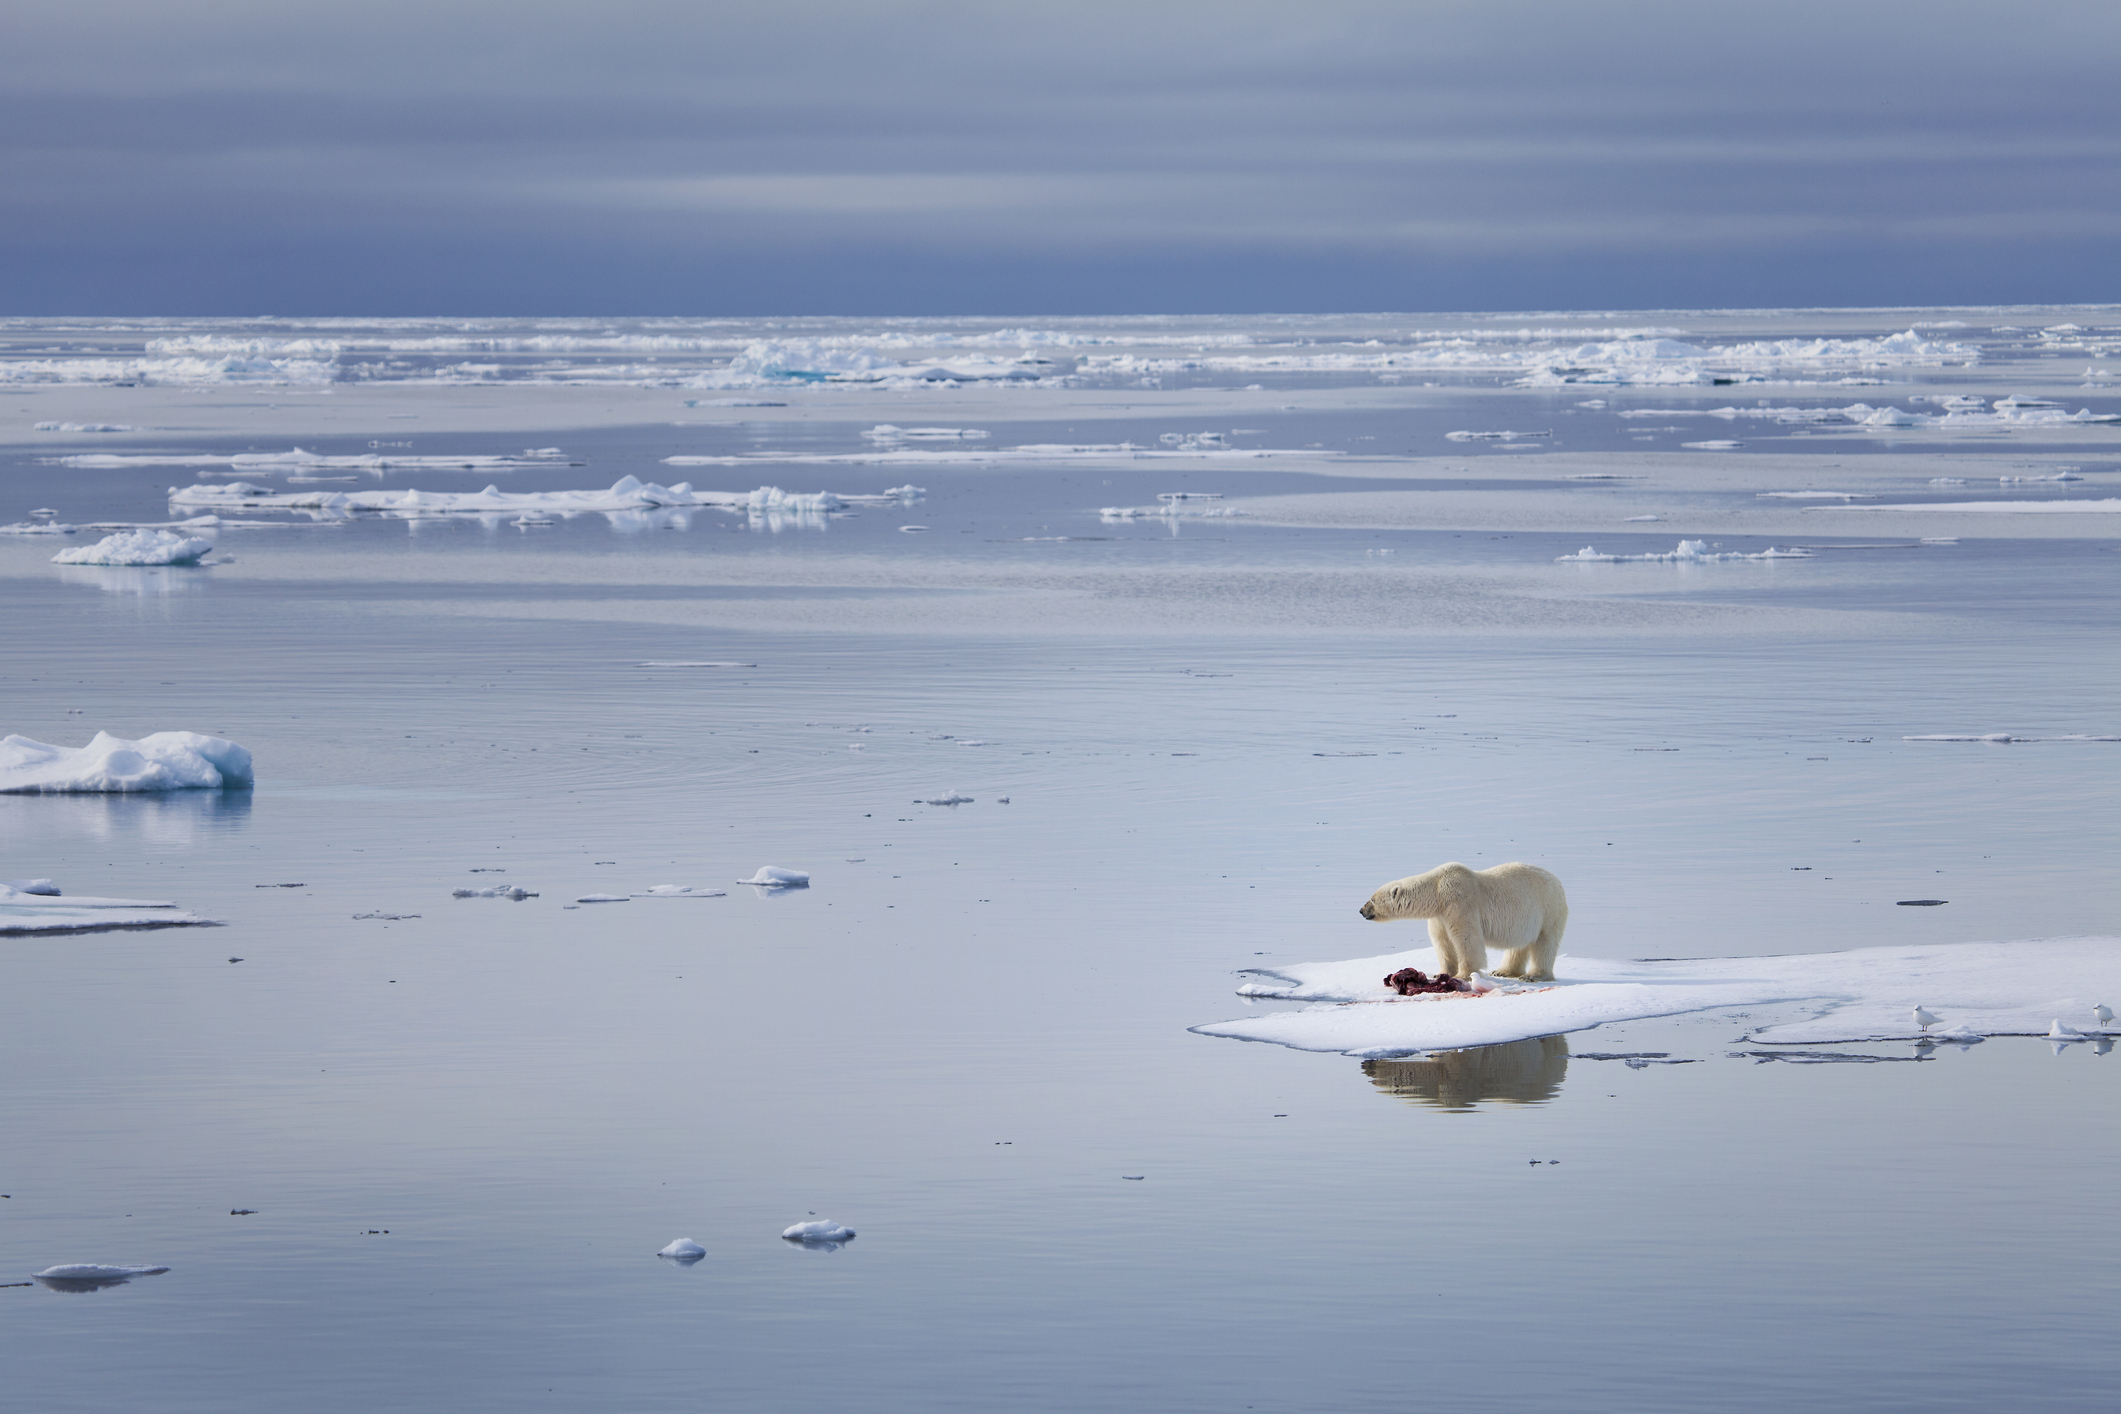 A large male polar bear stands on an ice float, surrounded by water.